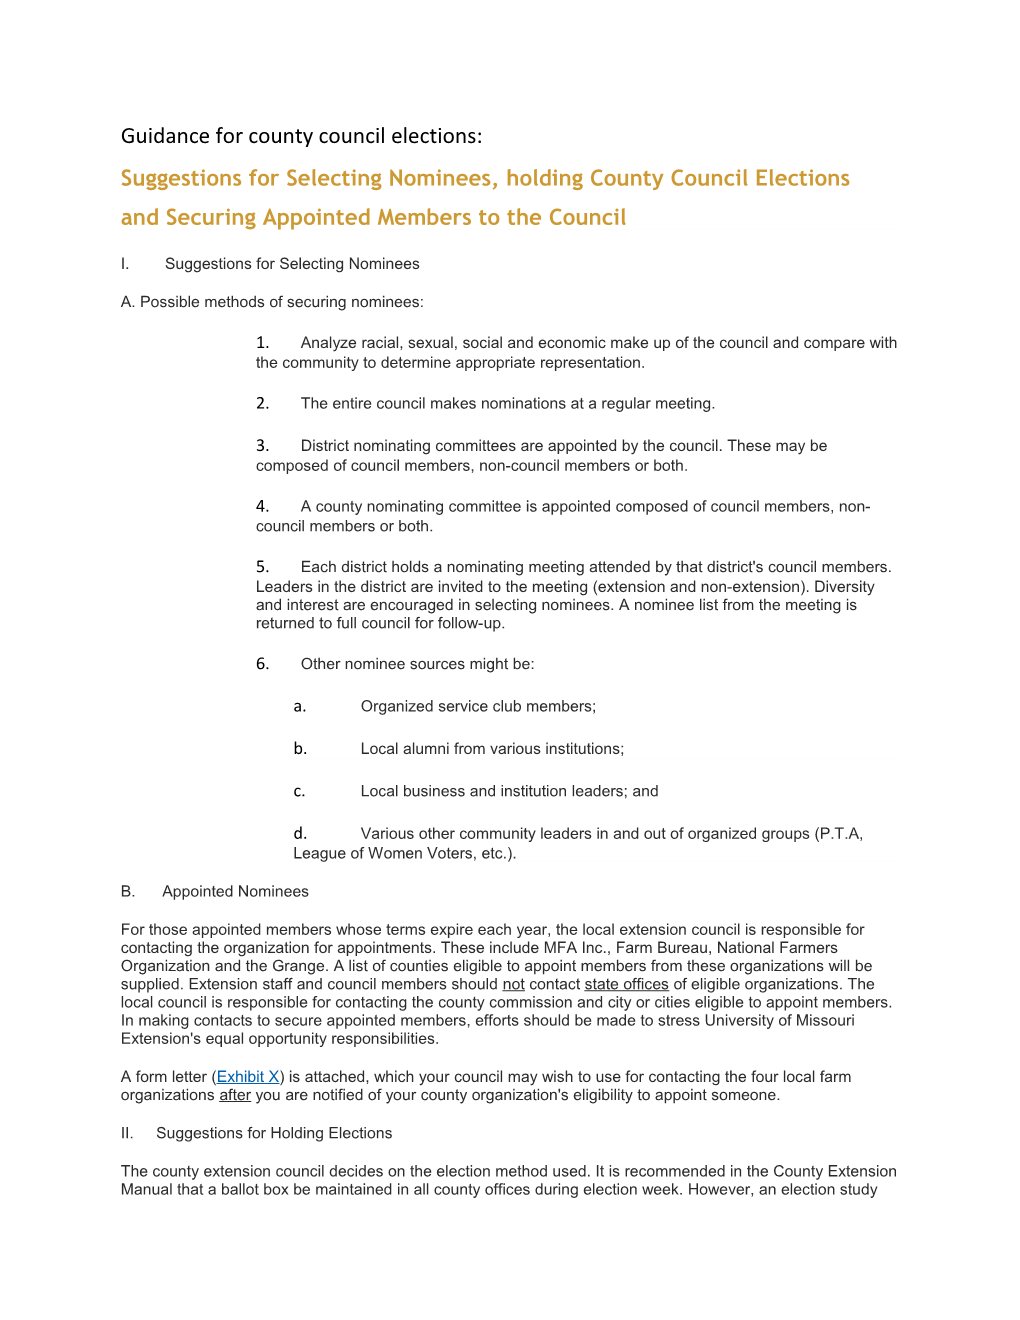 Guidance for County Council Elections